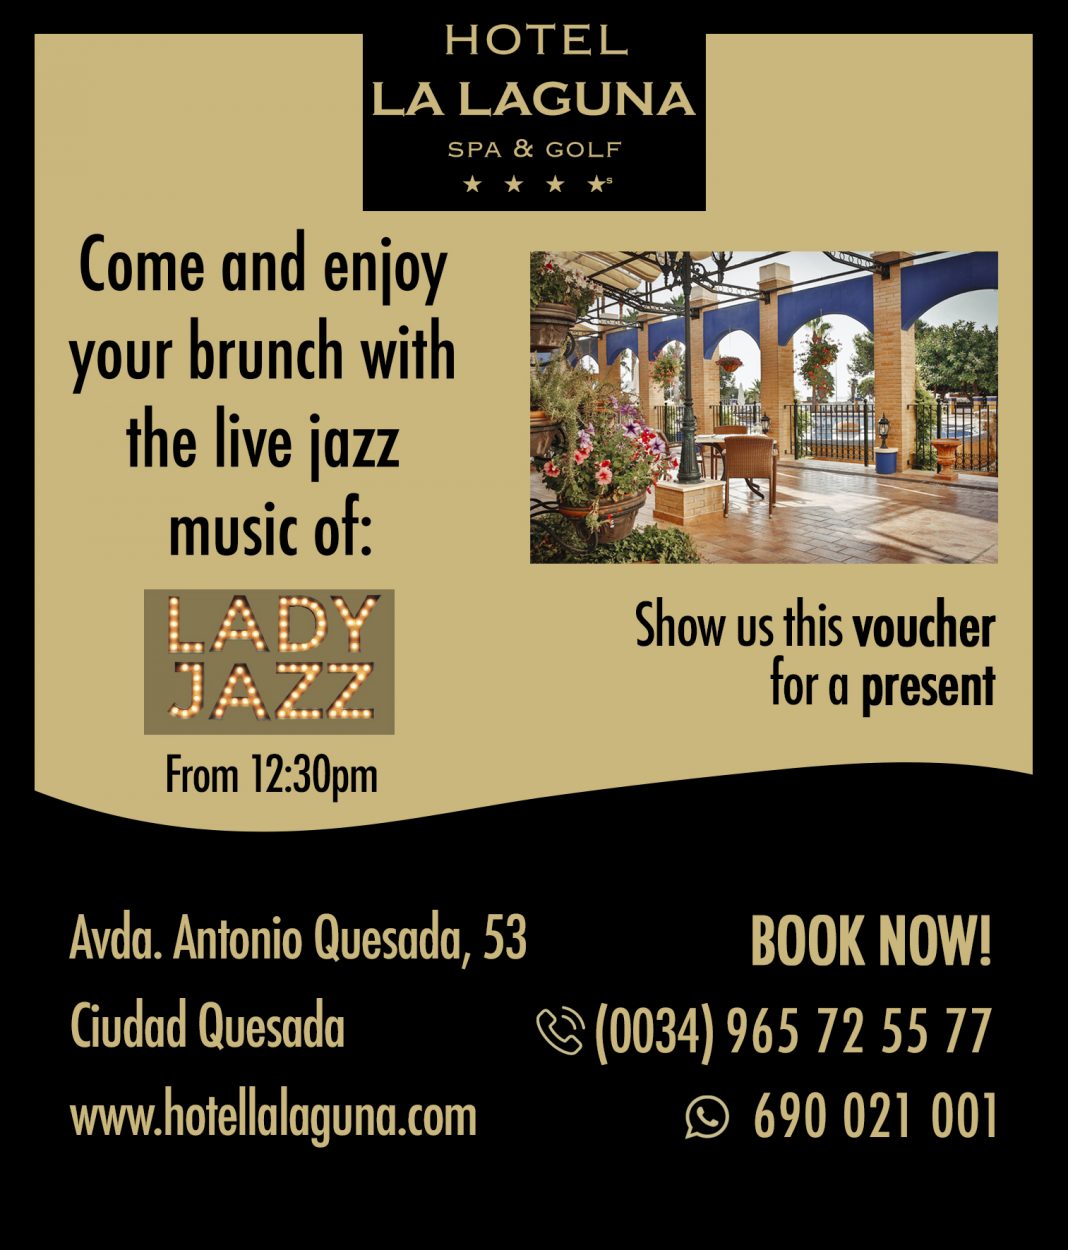 La Laguna Hotel and Spa Tuesday Brunch with Lady Jazz